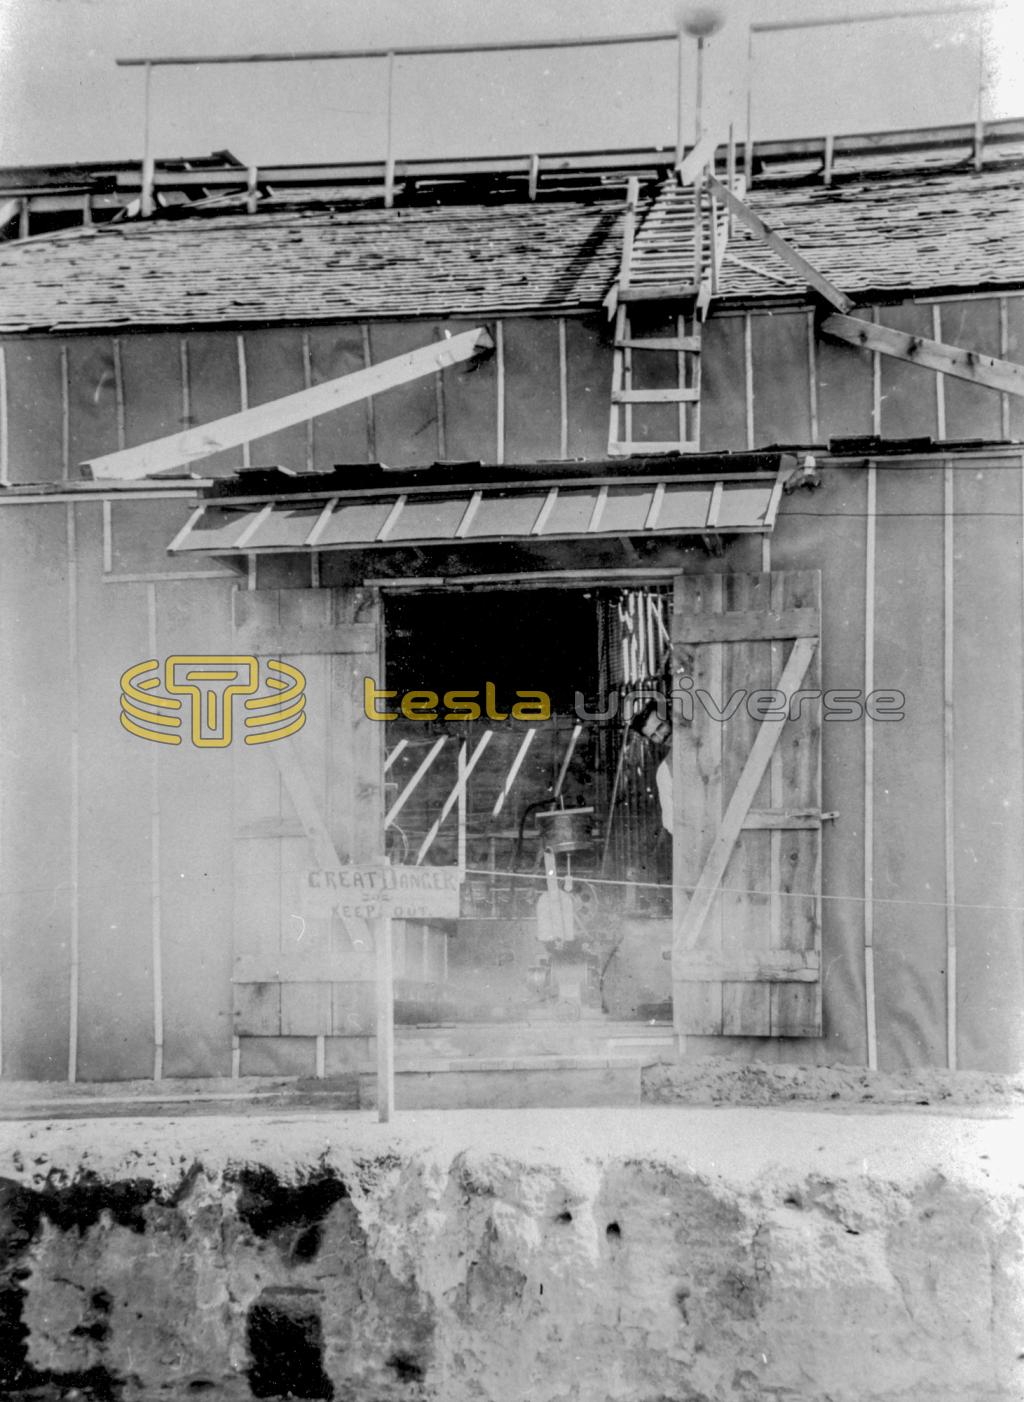 Tesla peeks out the door of the Colorado Springs laboratory, early summer 1899